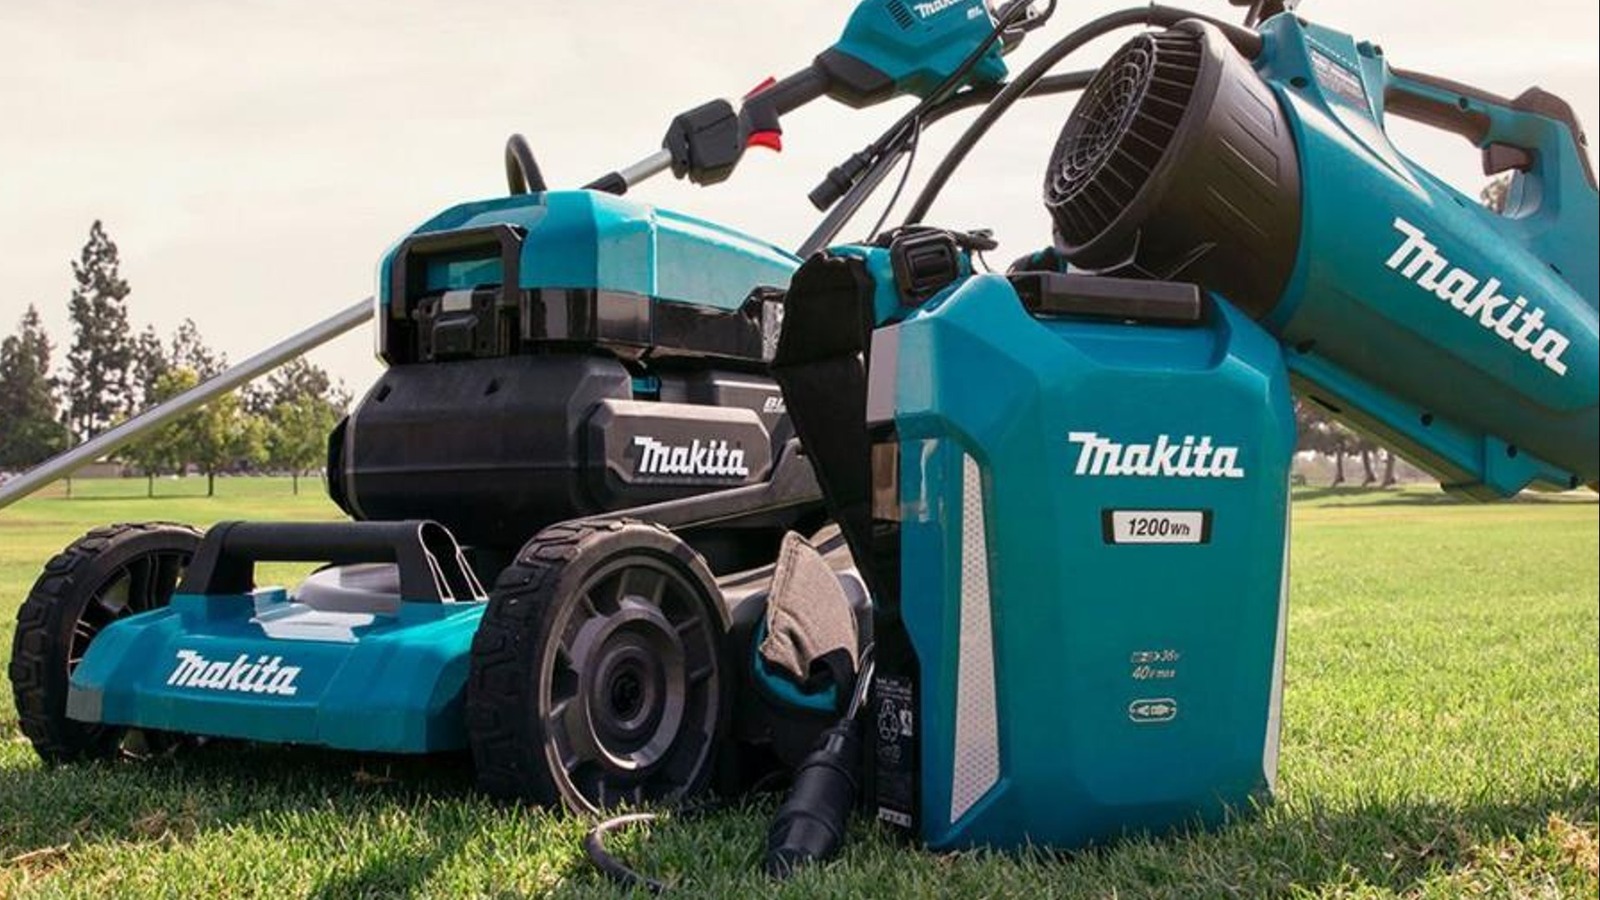 Understanding Makita’s ConnectX Technology and Compatible Tools